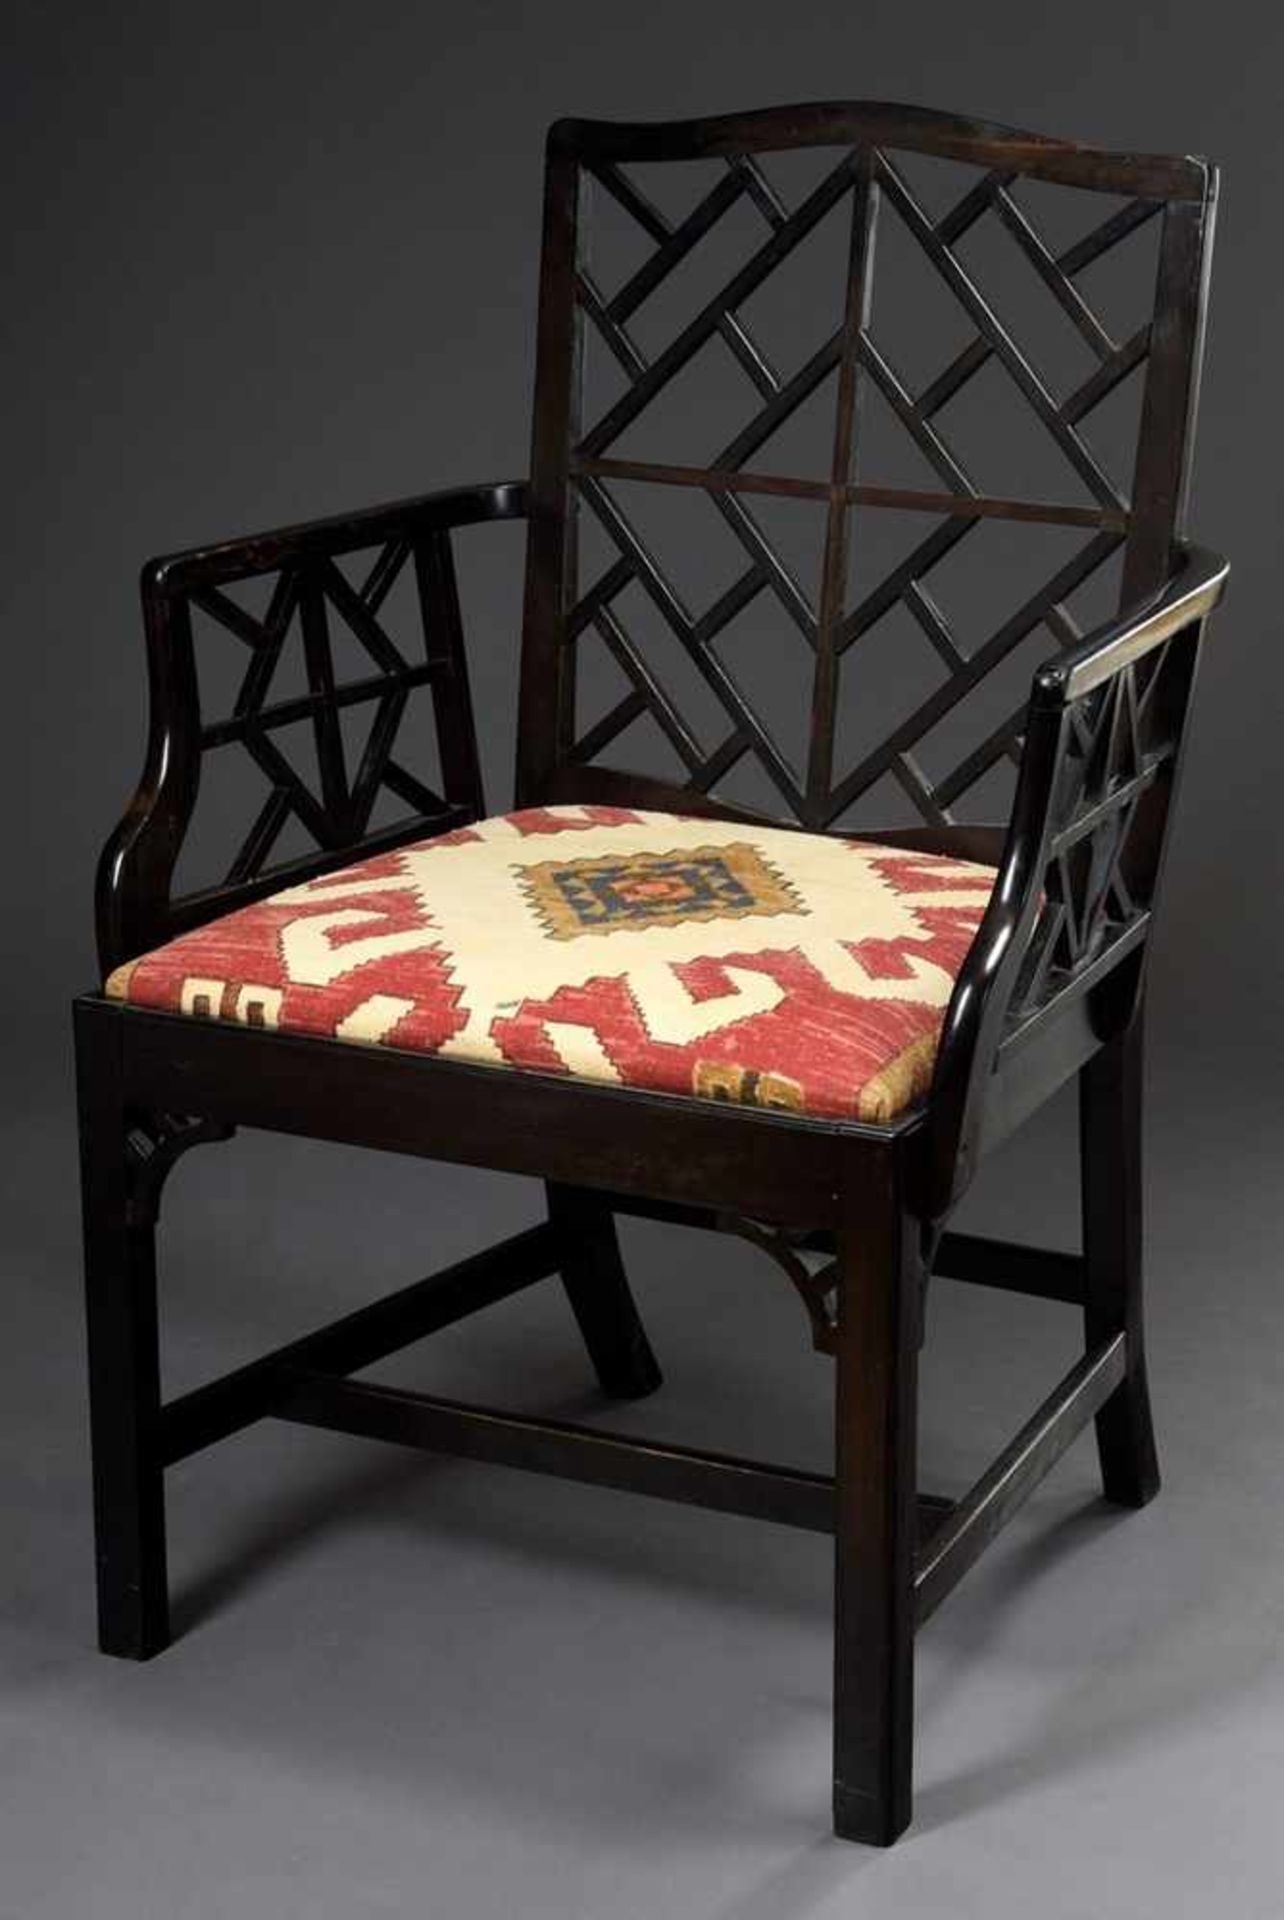 Ebony armchair in Chinese style designed by Thomas Chippendale, George III, England 2nd half 18th